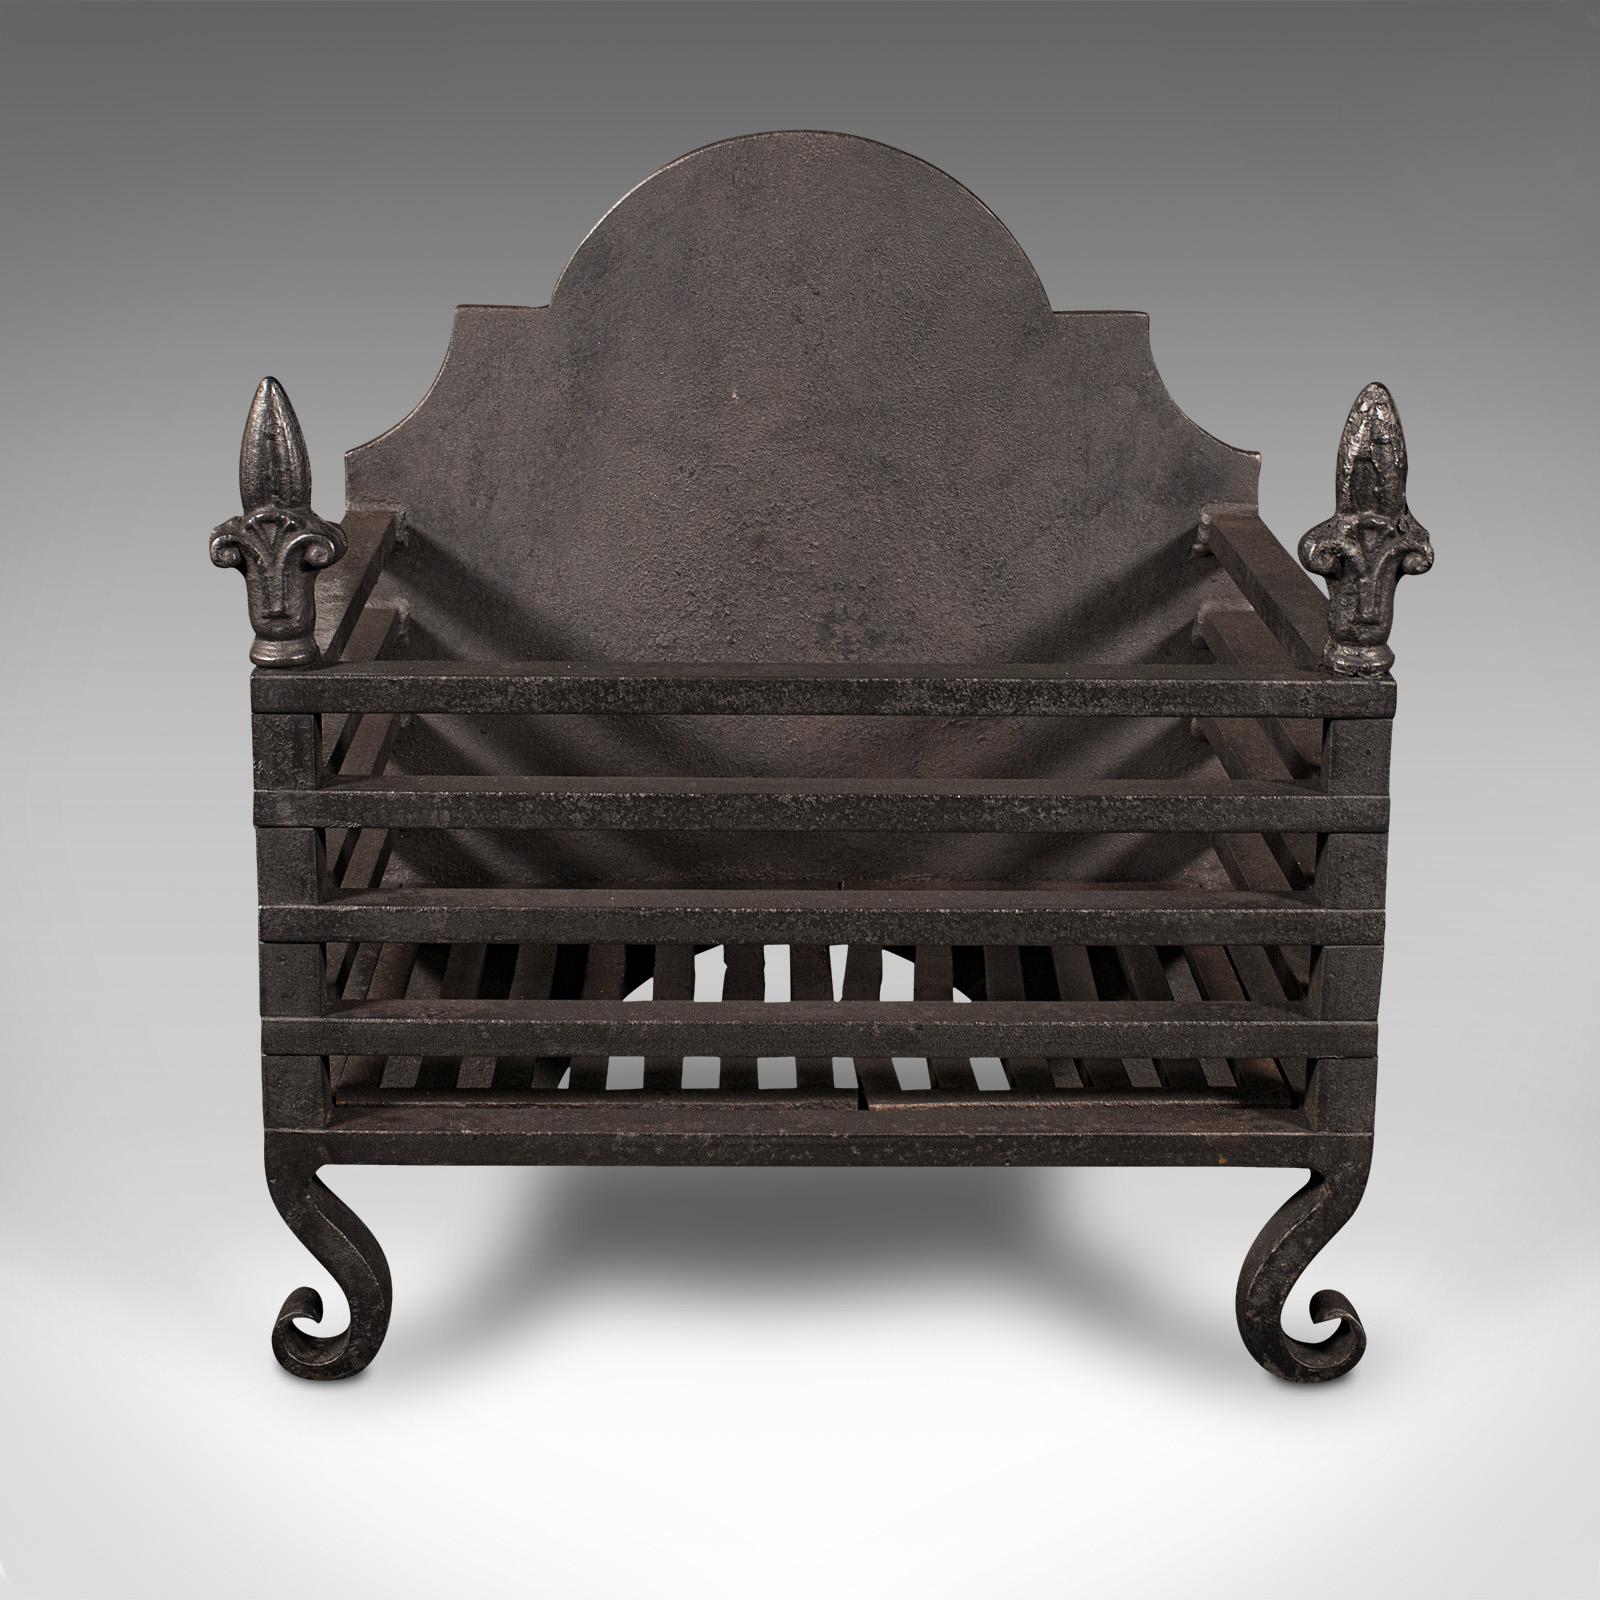 This is an antique fire grate. An English, cast iron fireplace basket, dating to the late Victorian period, circa 1900.

Appealing, self-contained grate with ideal proportion for the smaller hearth
Displays a desirable aged patina and in good